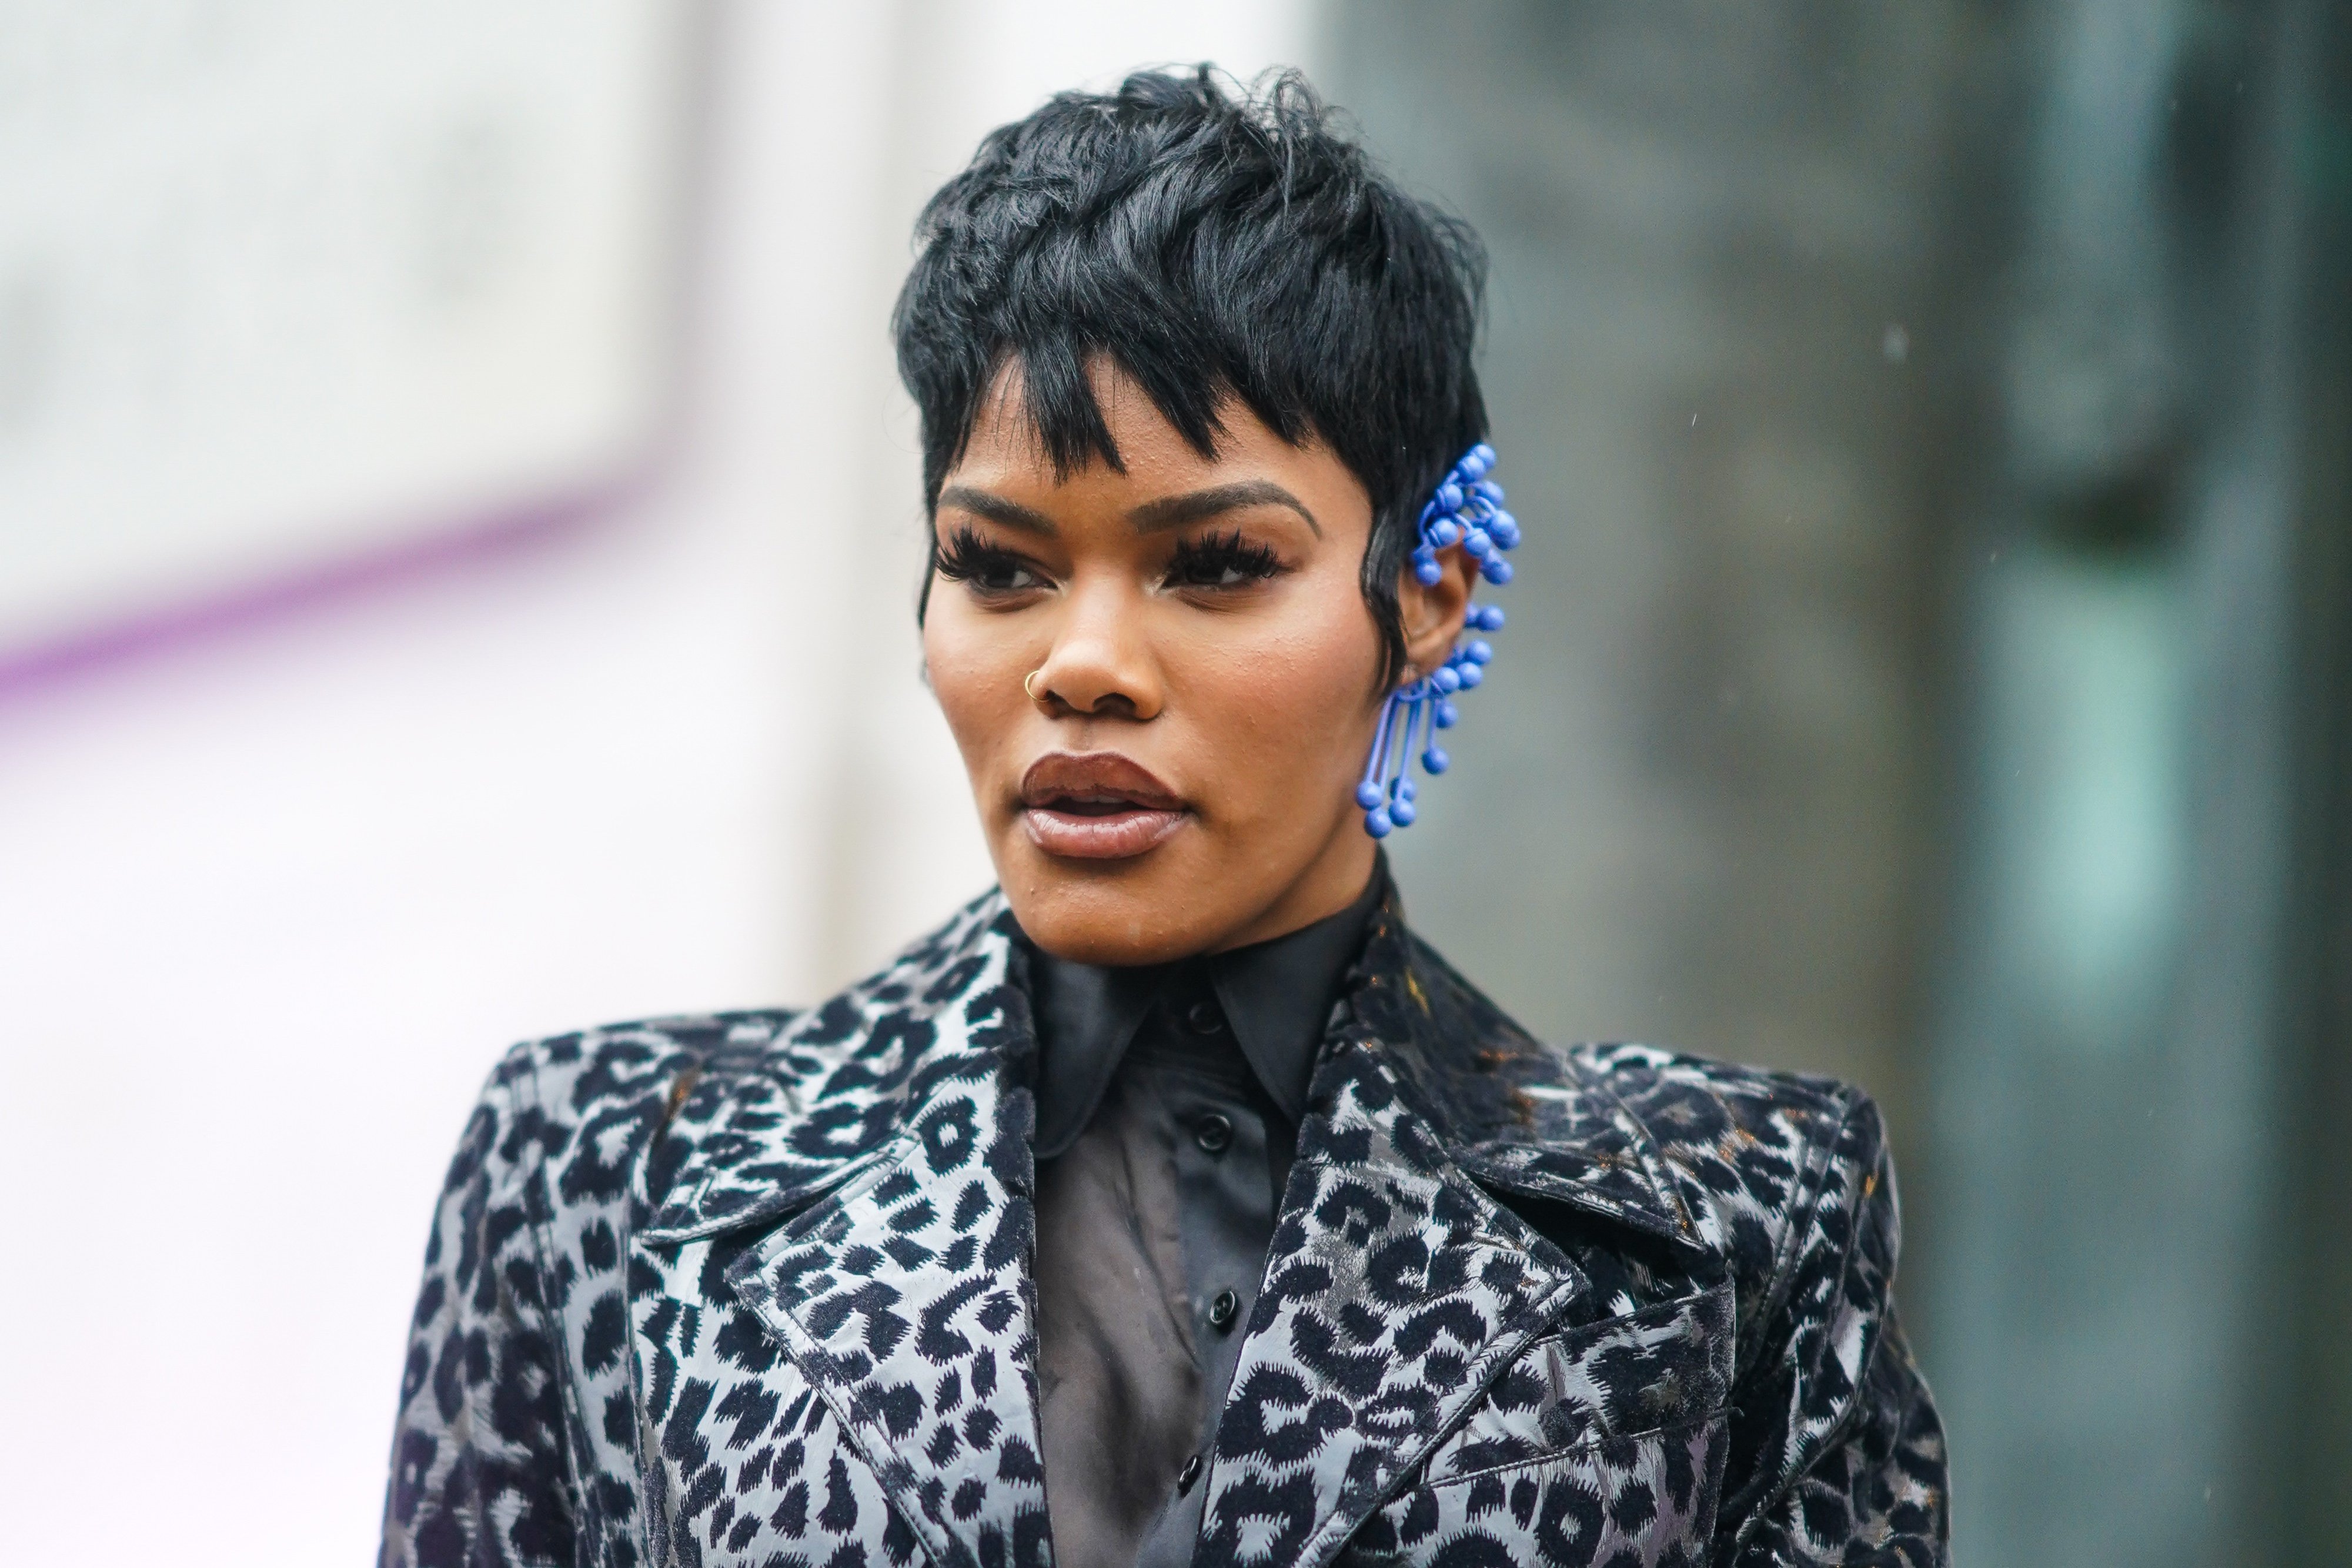 Teyana Taylor at the Paris Fashion Week - Womenswear Fall/Winter 2020/2021, on February 26, 2020. | Photo: Getty Images